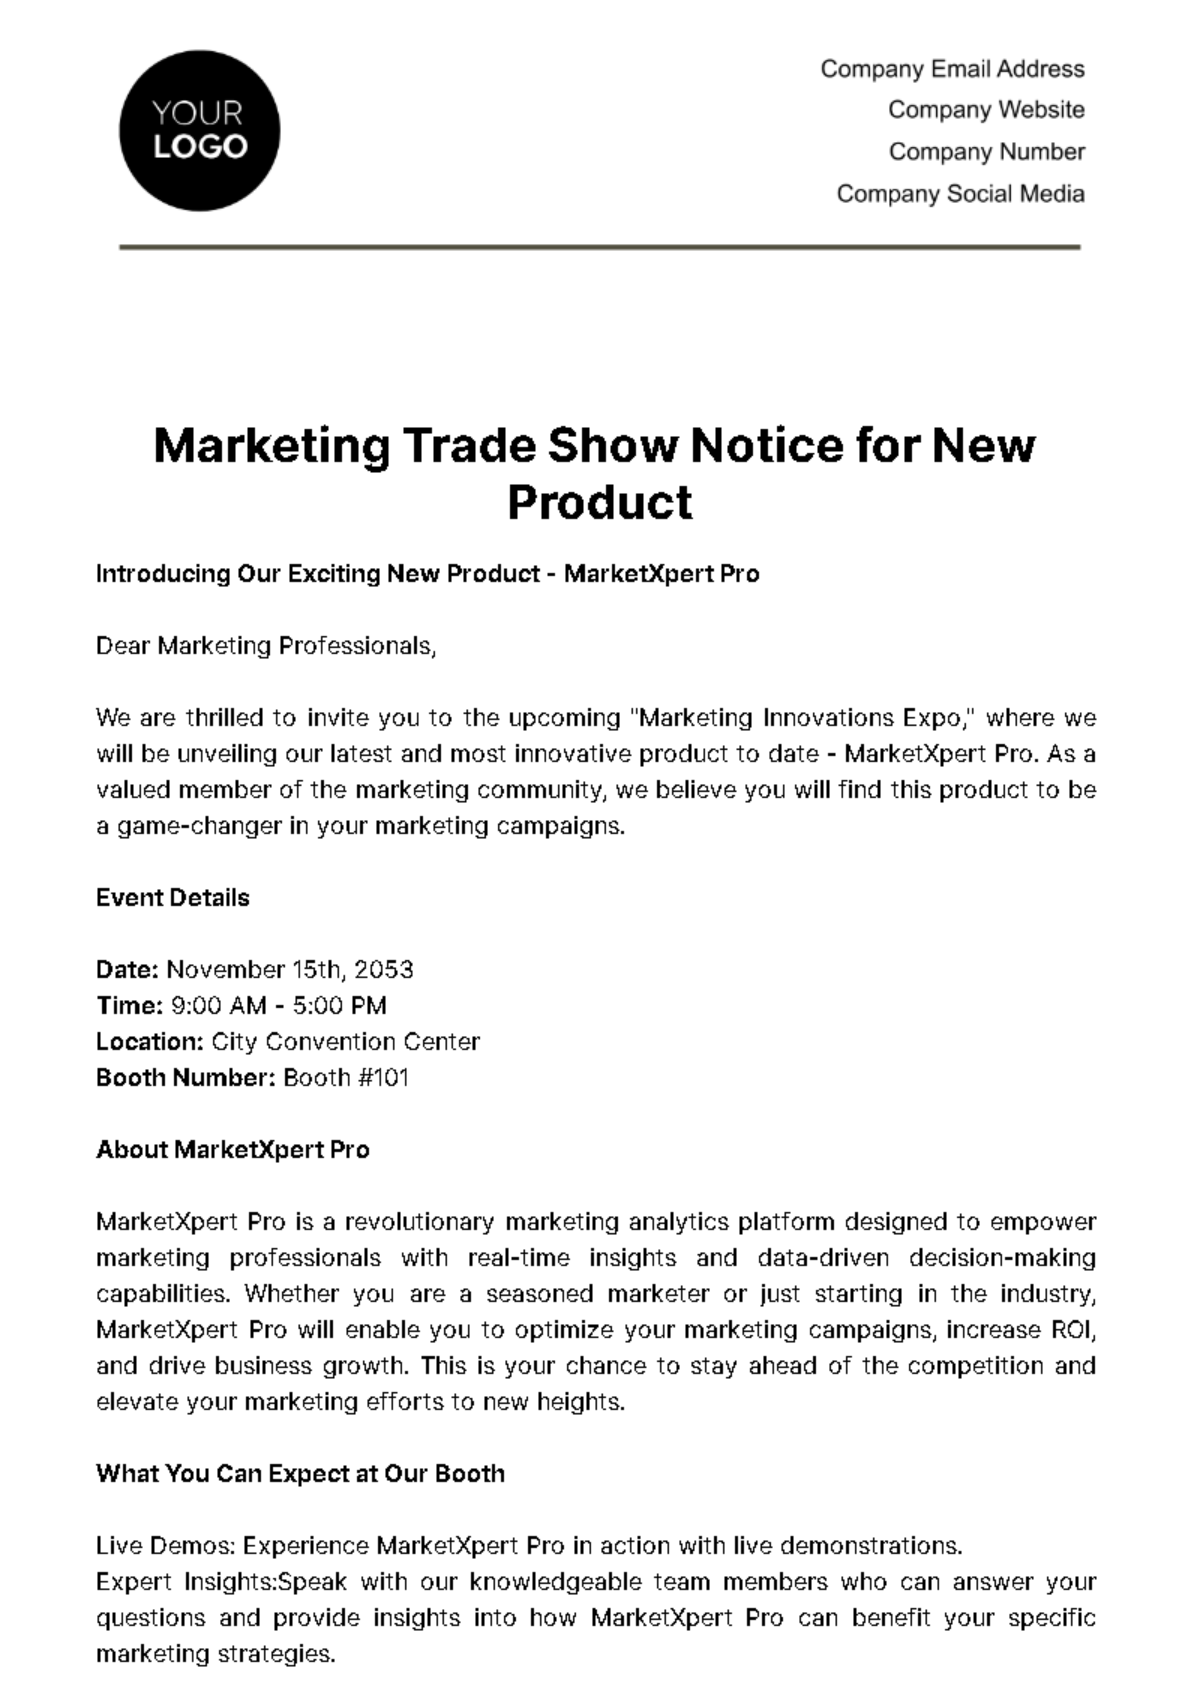 Free Marketing Trade Show Notice for New Product Template